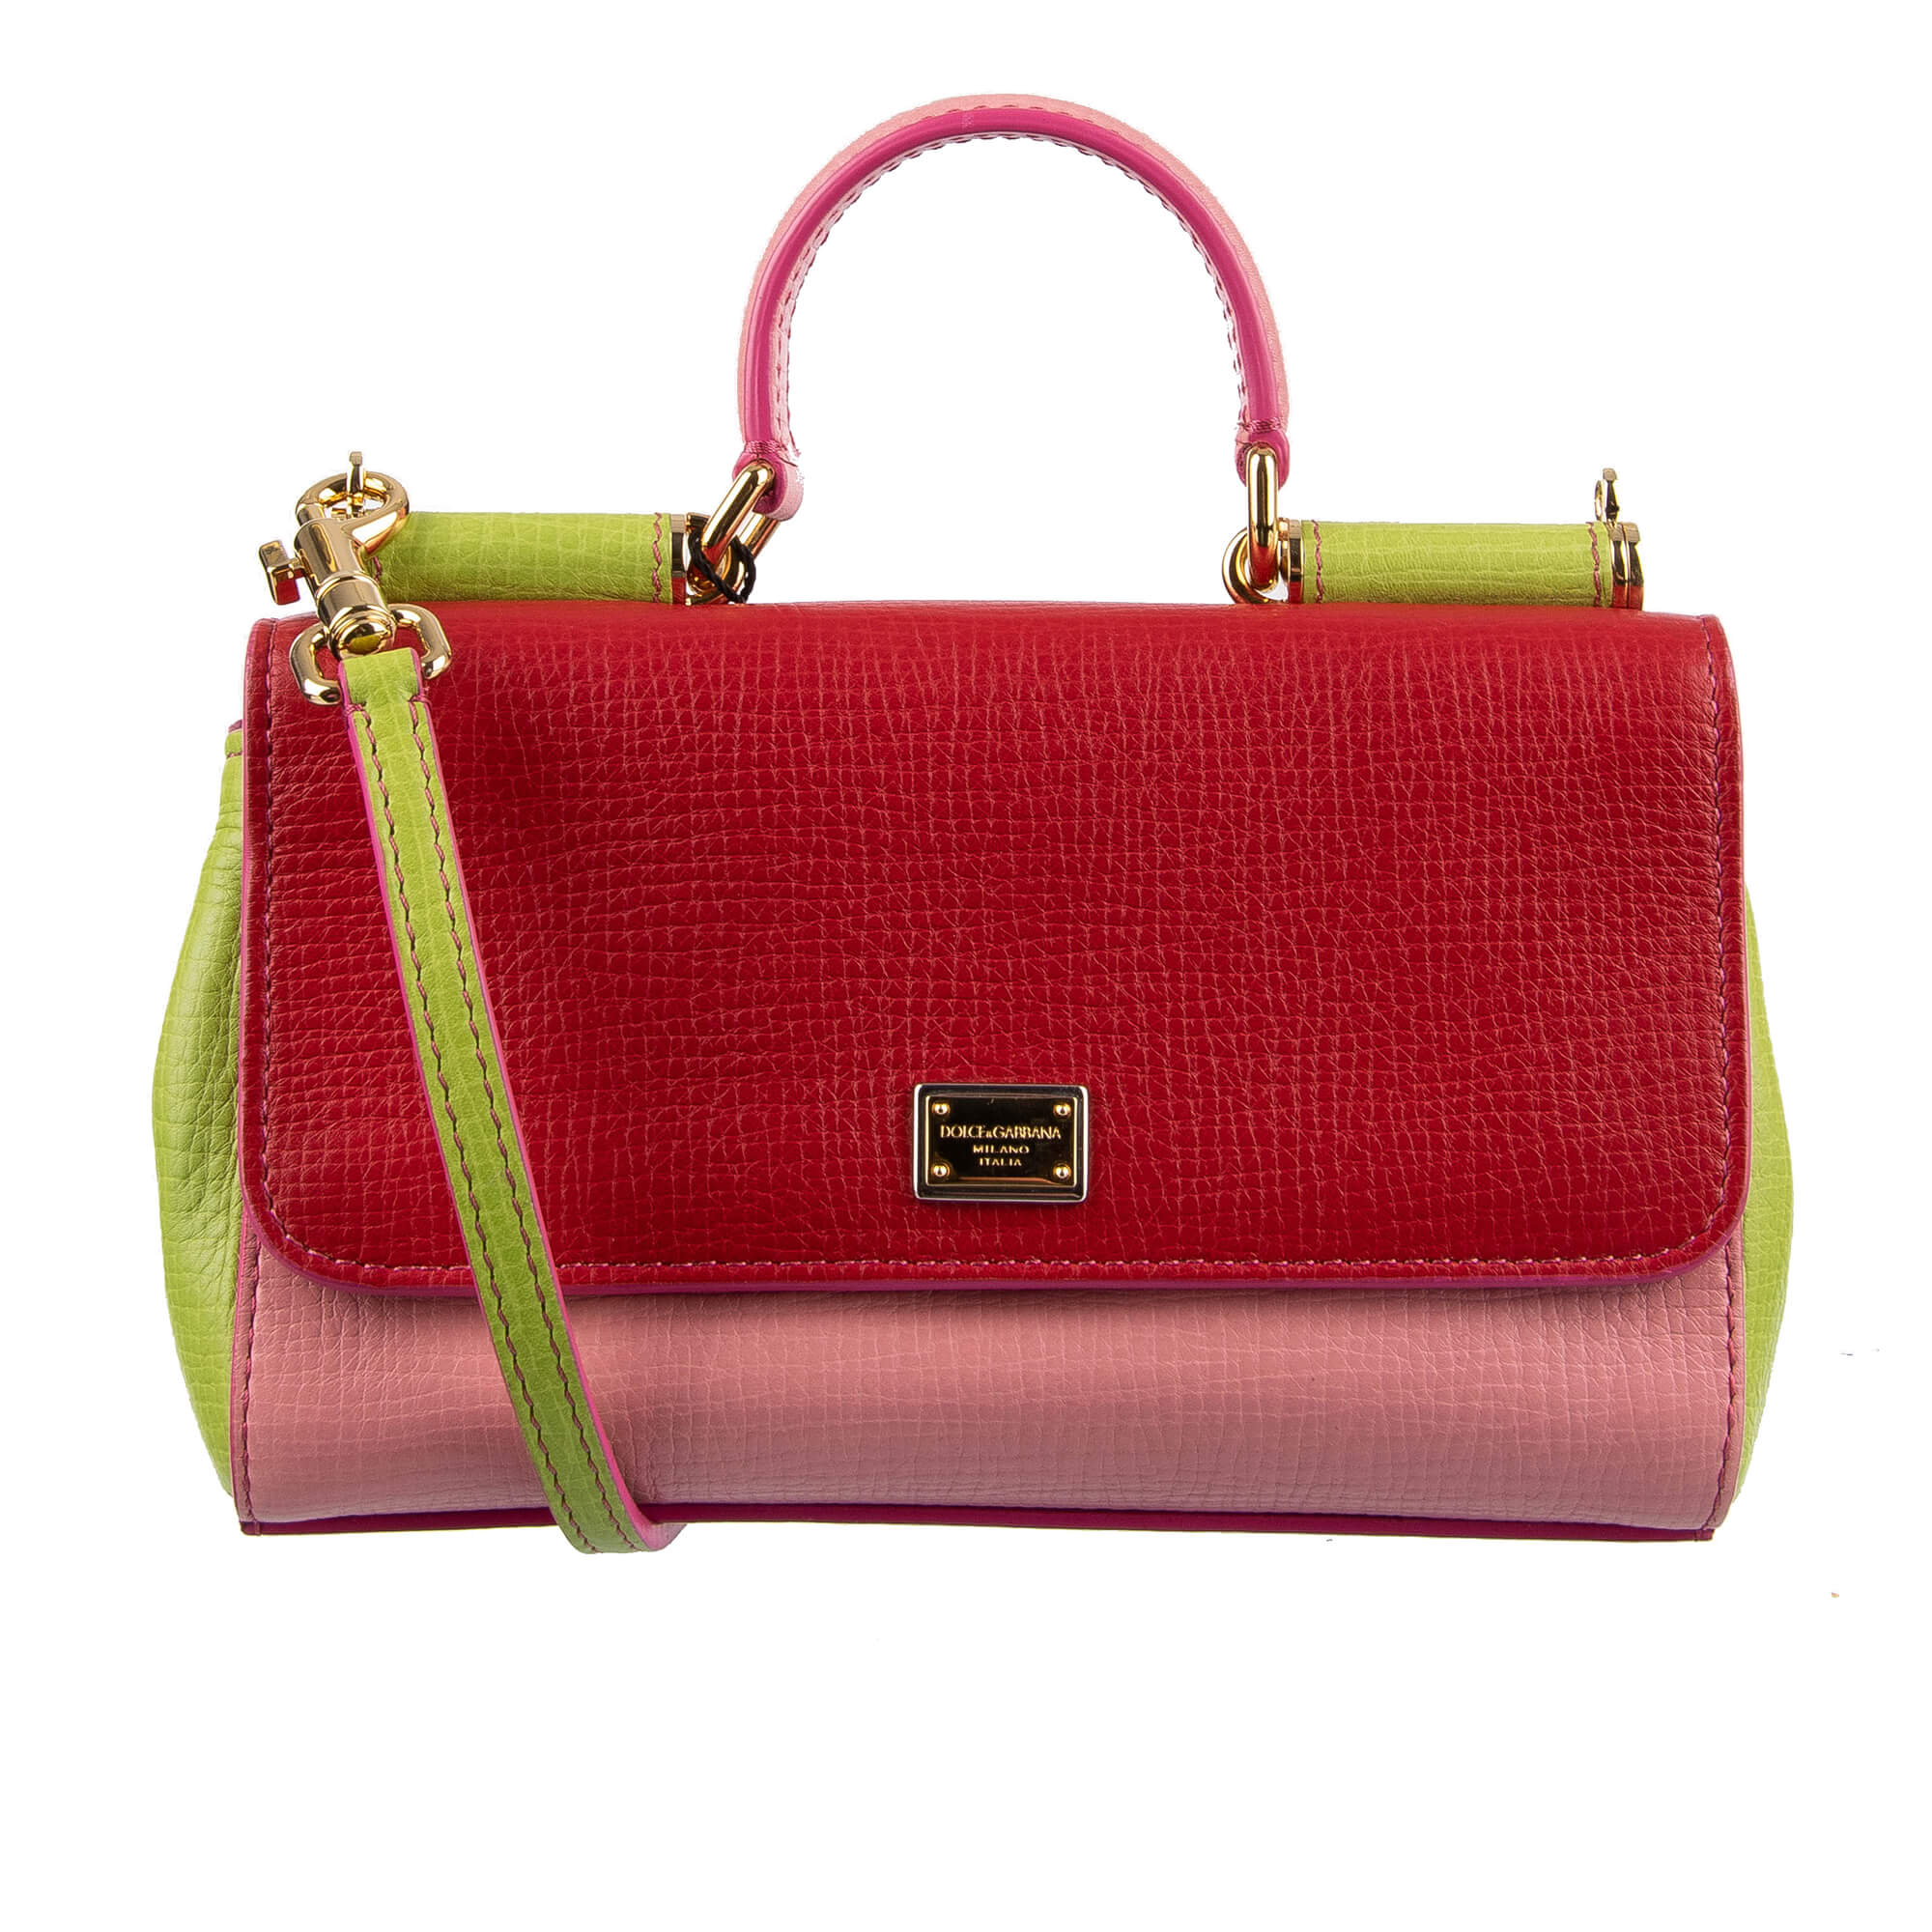 Dolce & Gabbana Leather Bag MISS SICILY Mini Red Pink